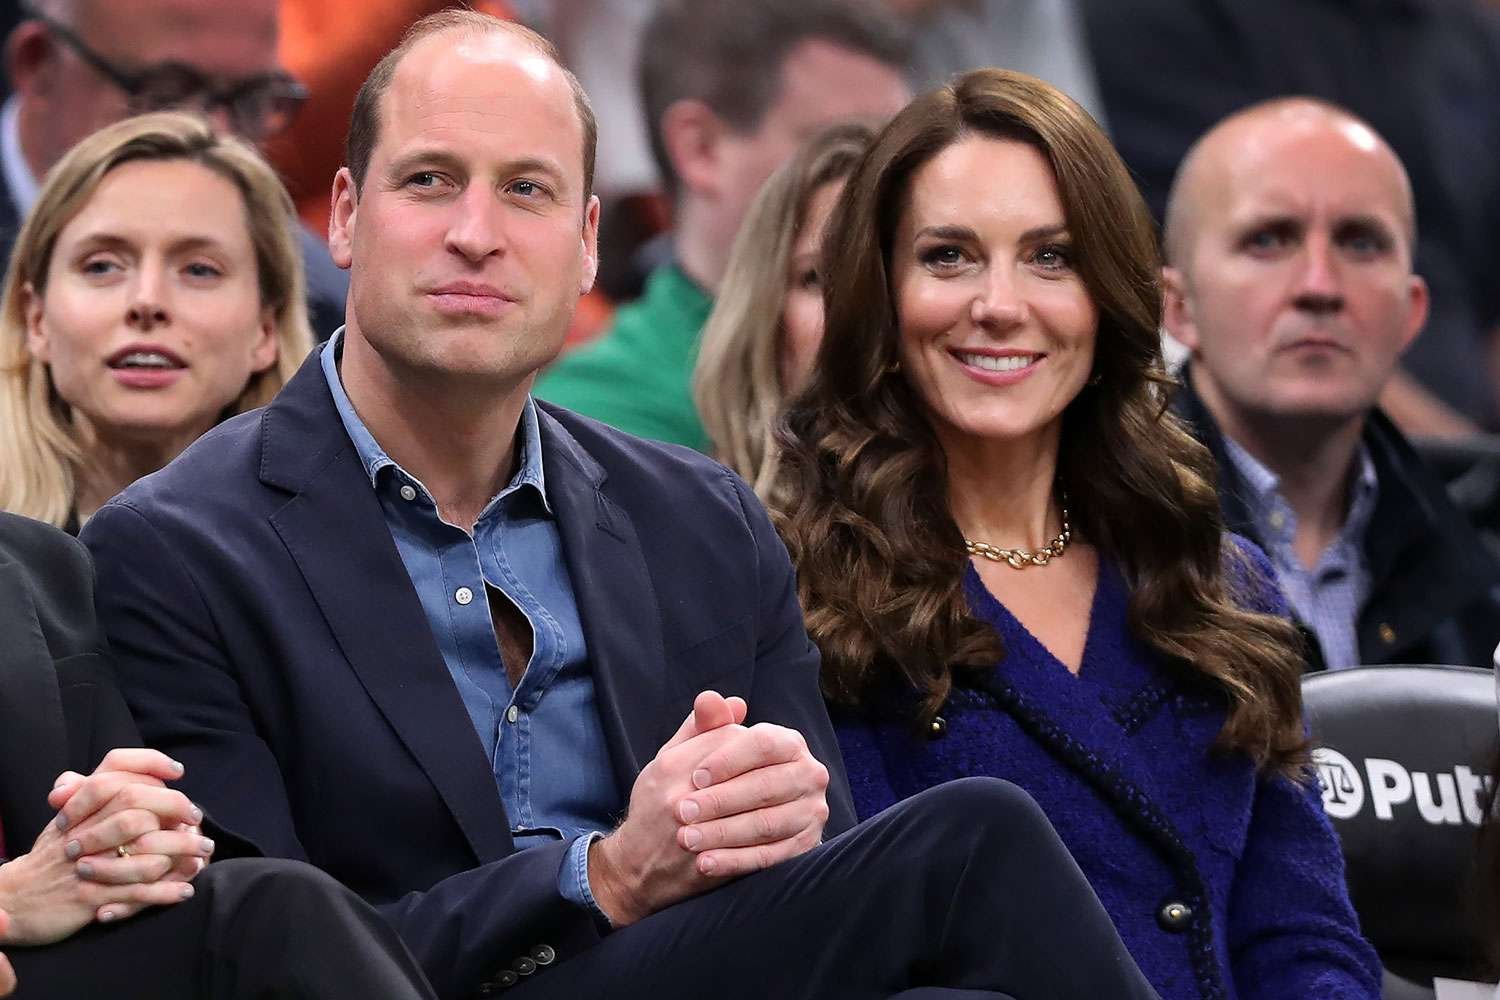 Kate Middleton and Prince William Sit Courtside at Boston Celtics Game: 'Let's Go!'